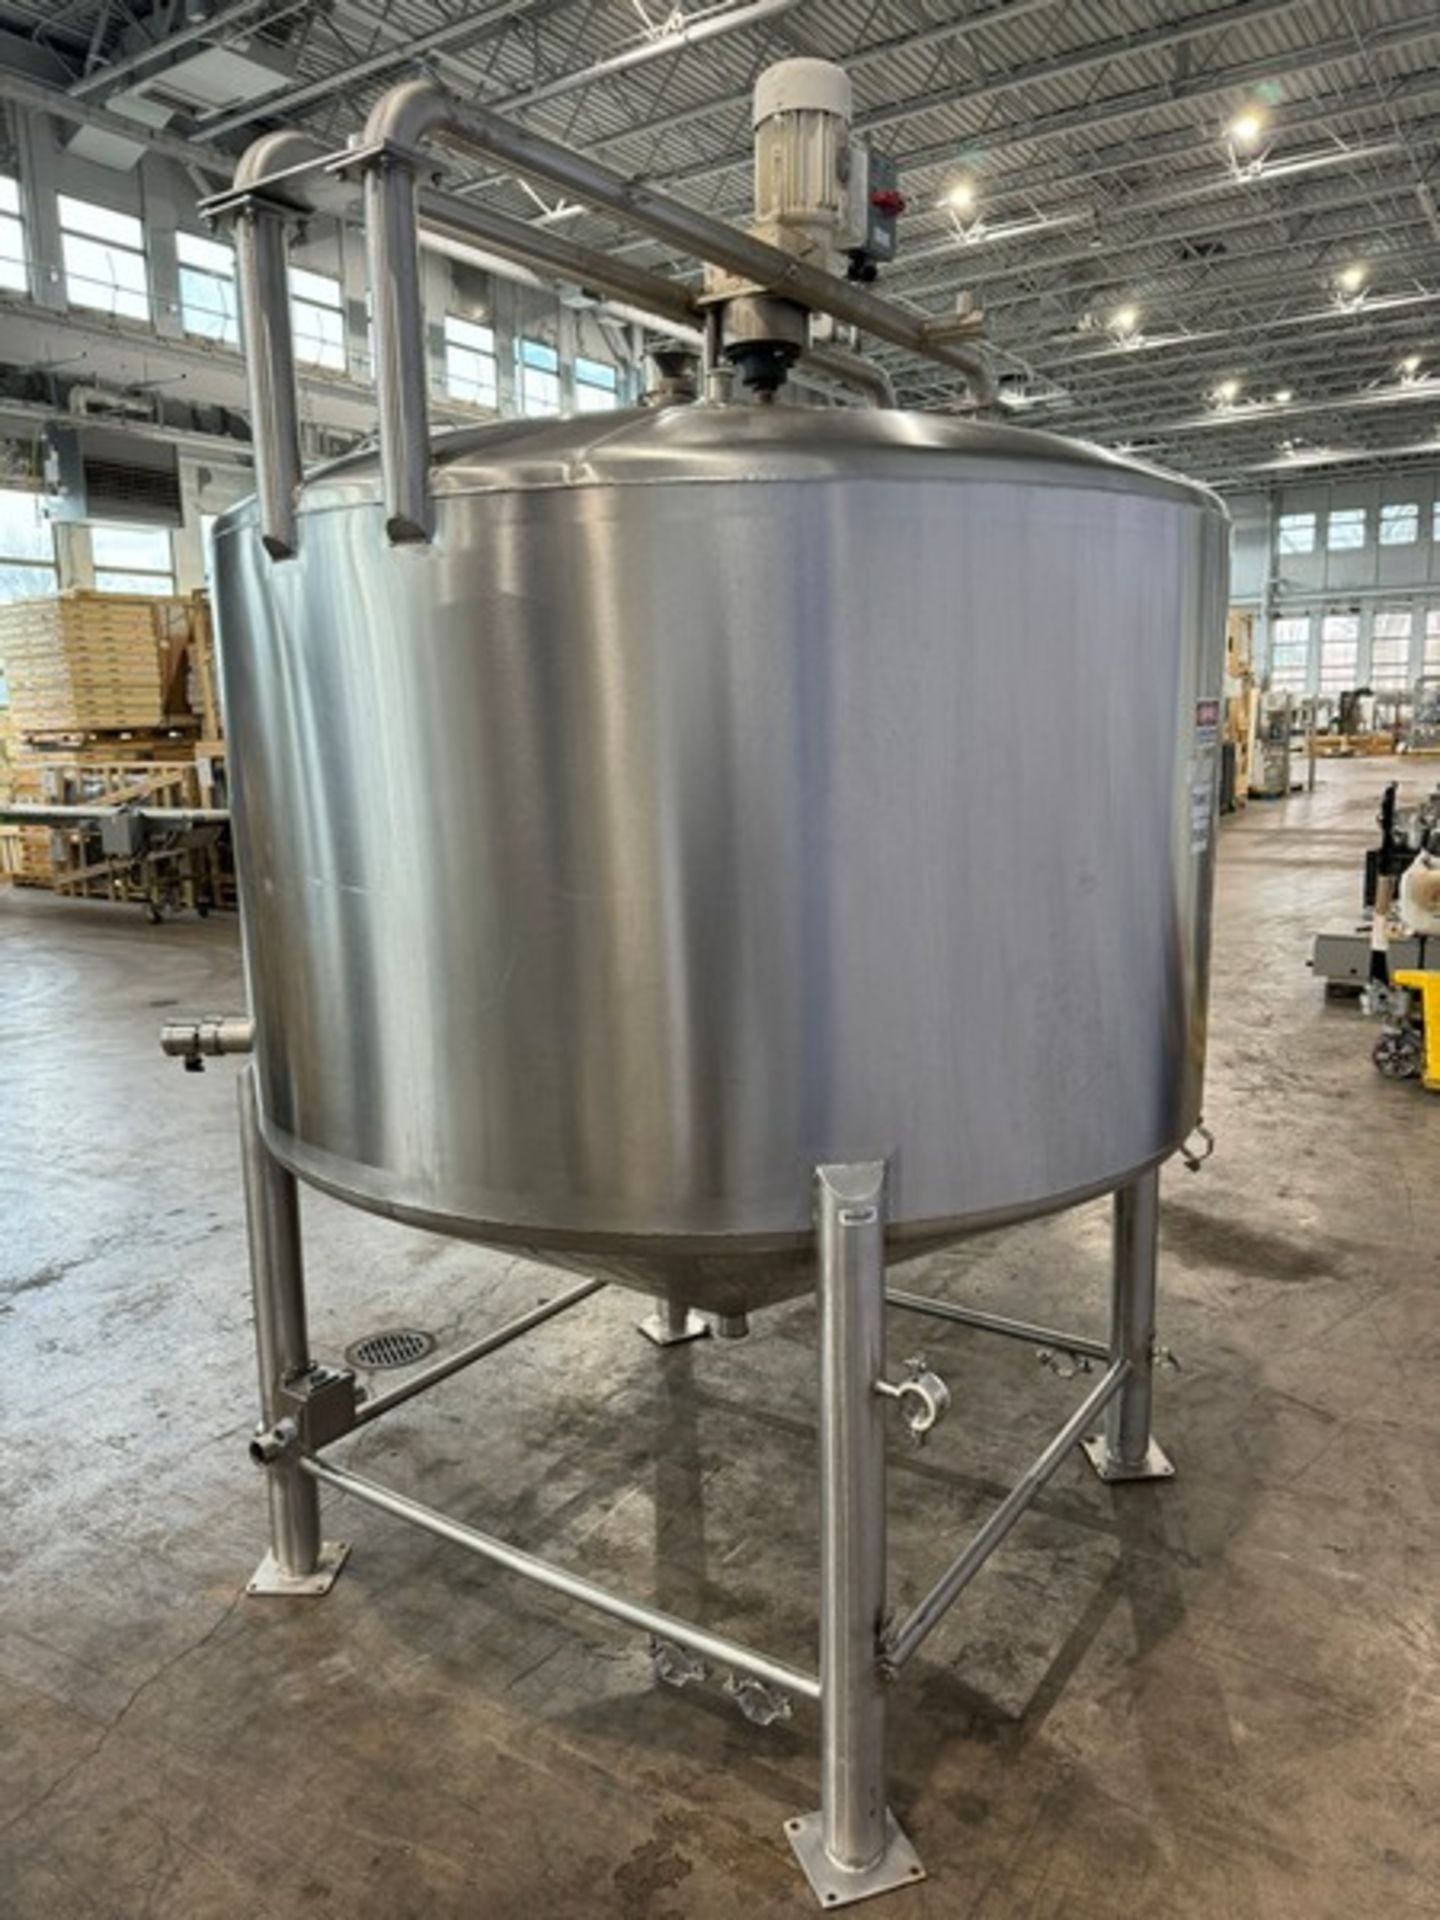 Aprox. 500 Gal. S/S Single Wall Mixing Tank, Vessel Dims.: Aprox. 36" H x 36" Dia., with Dome Top, - Image 4 of 15